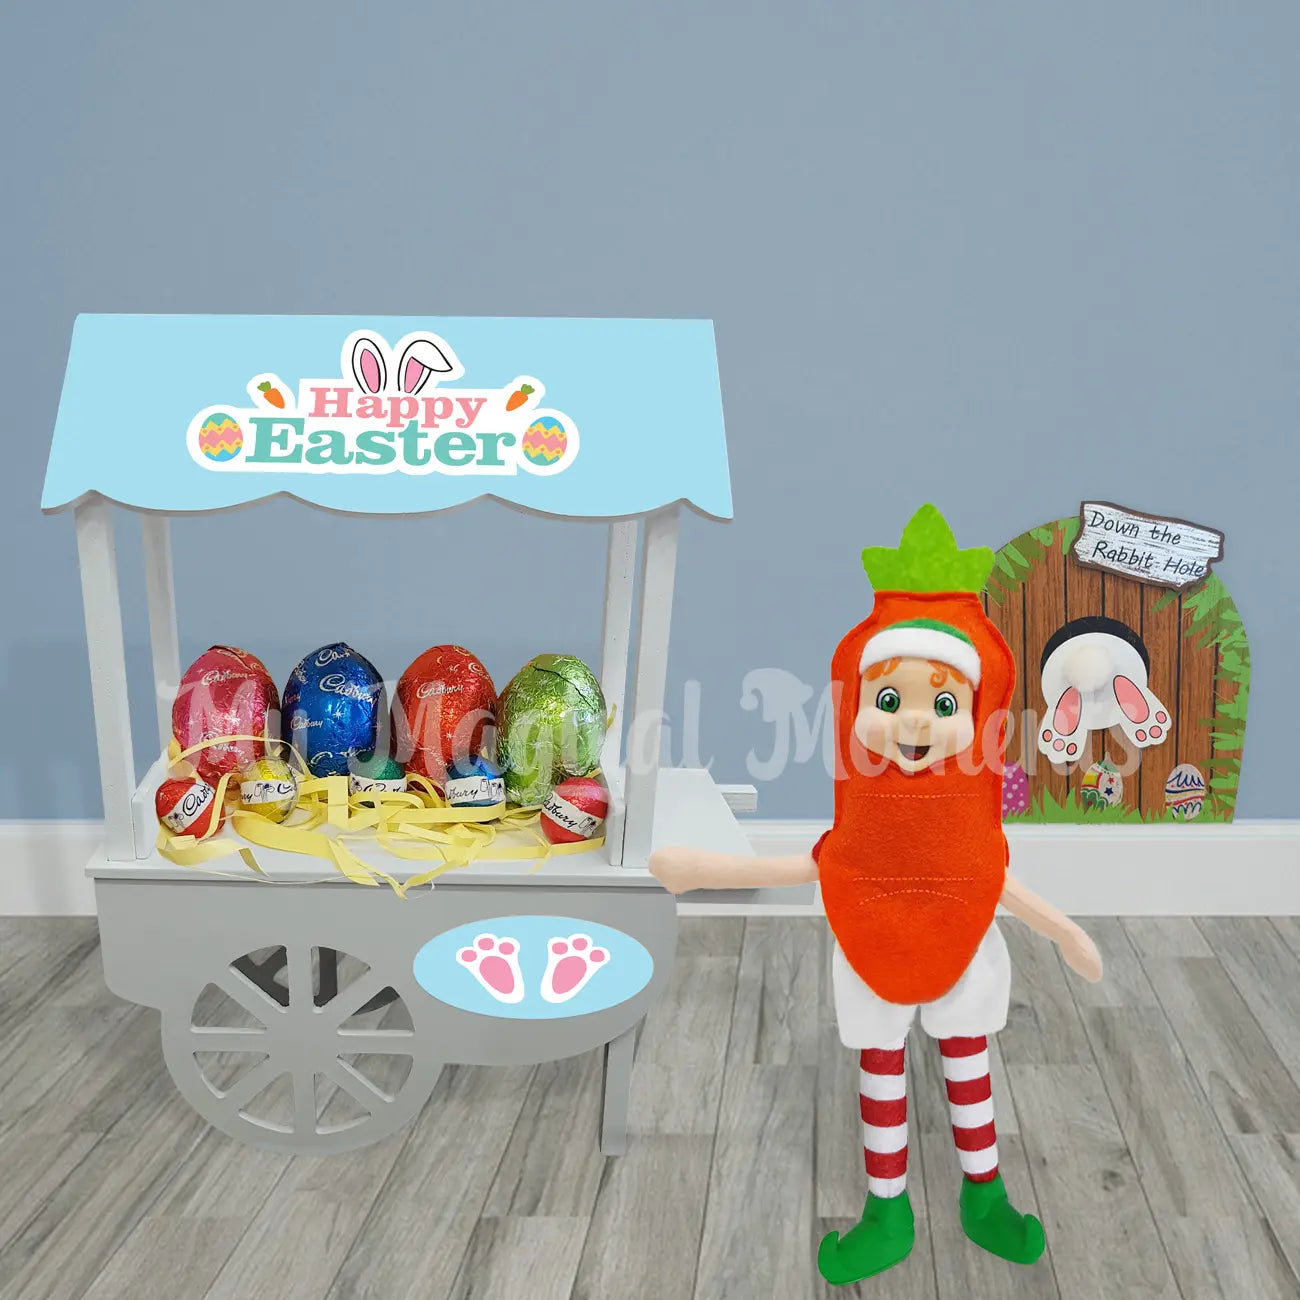 Elf wearing a carrot costume with an bunny easter door for easter display